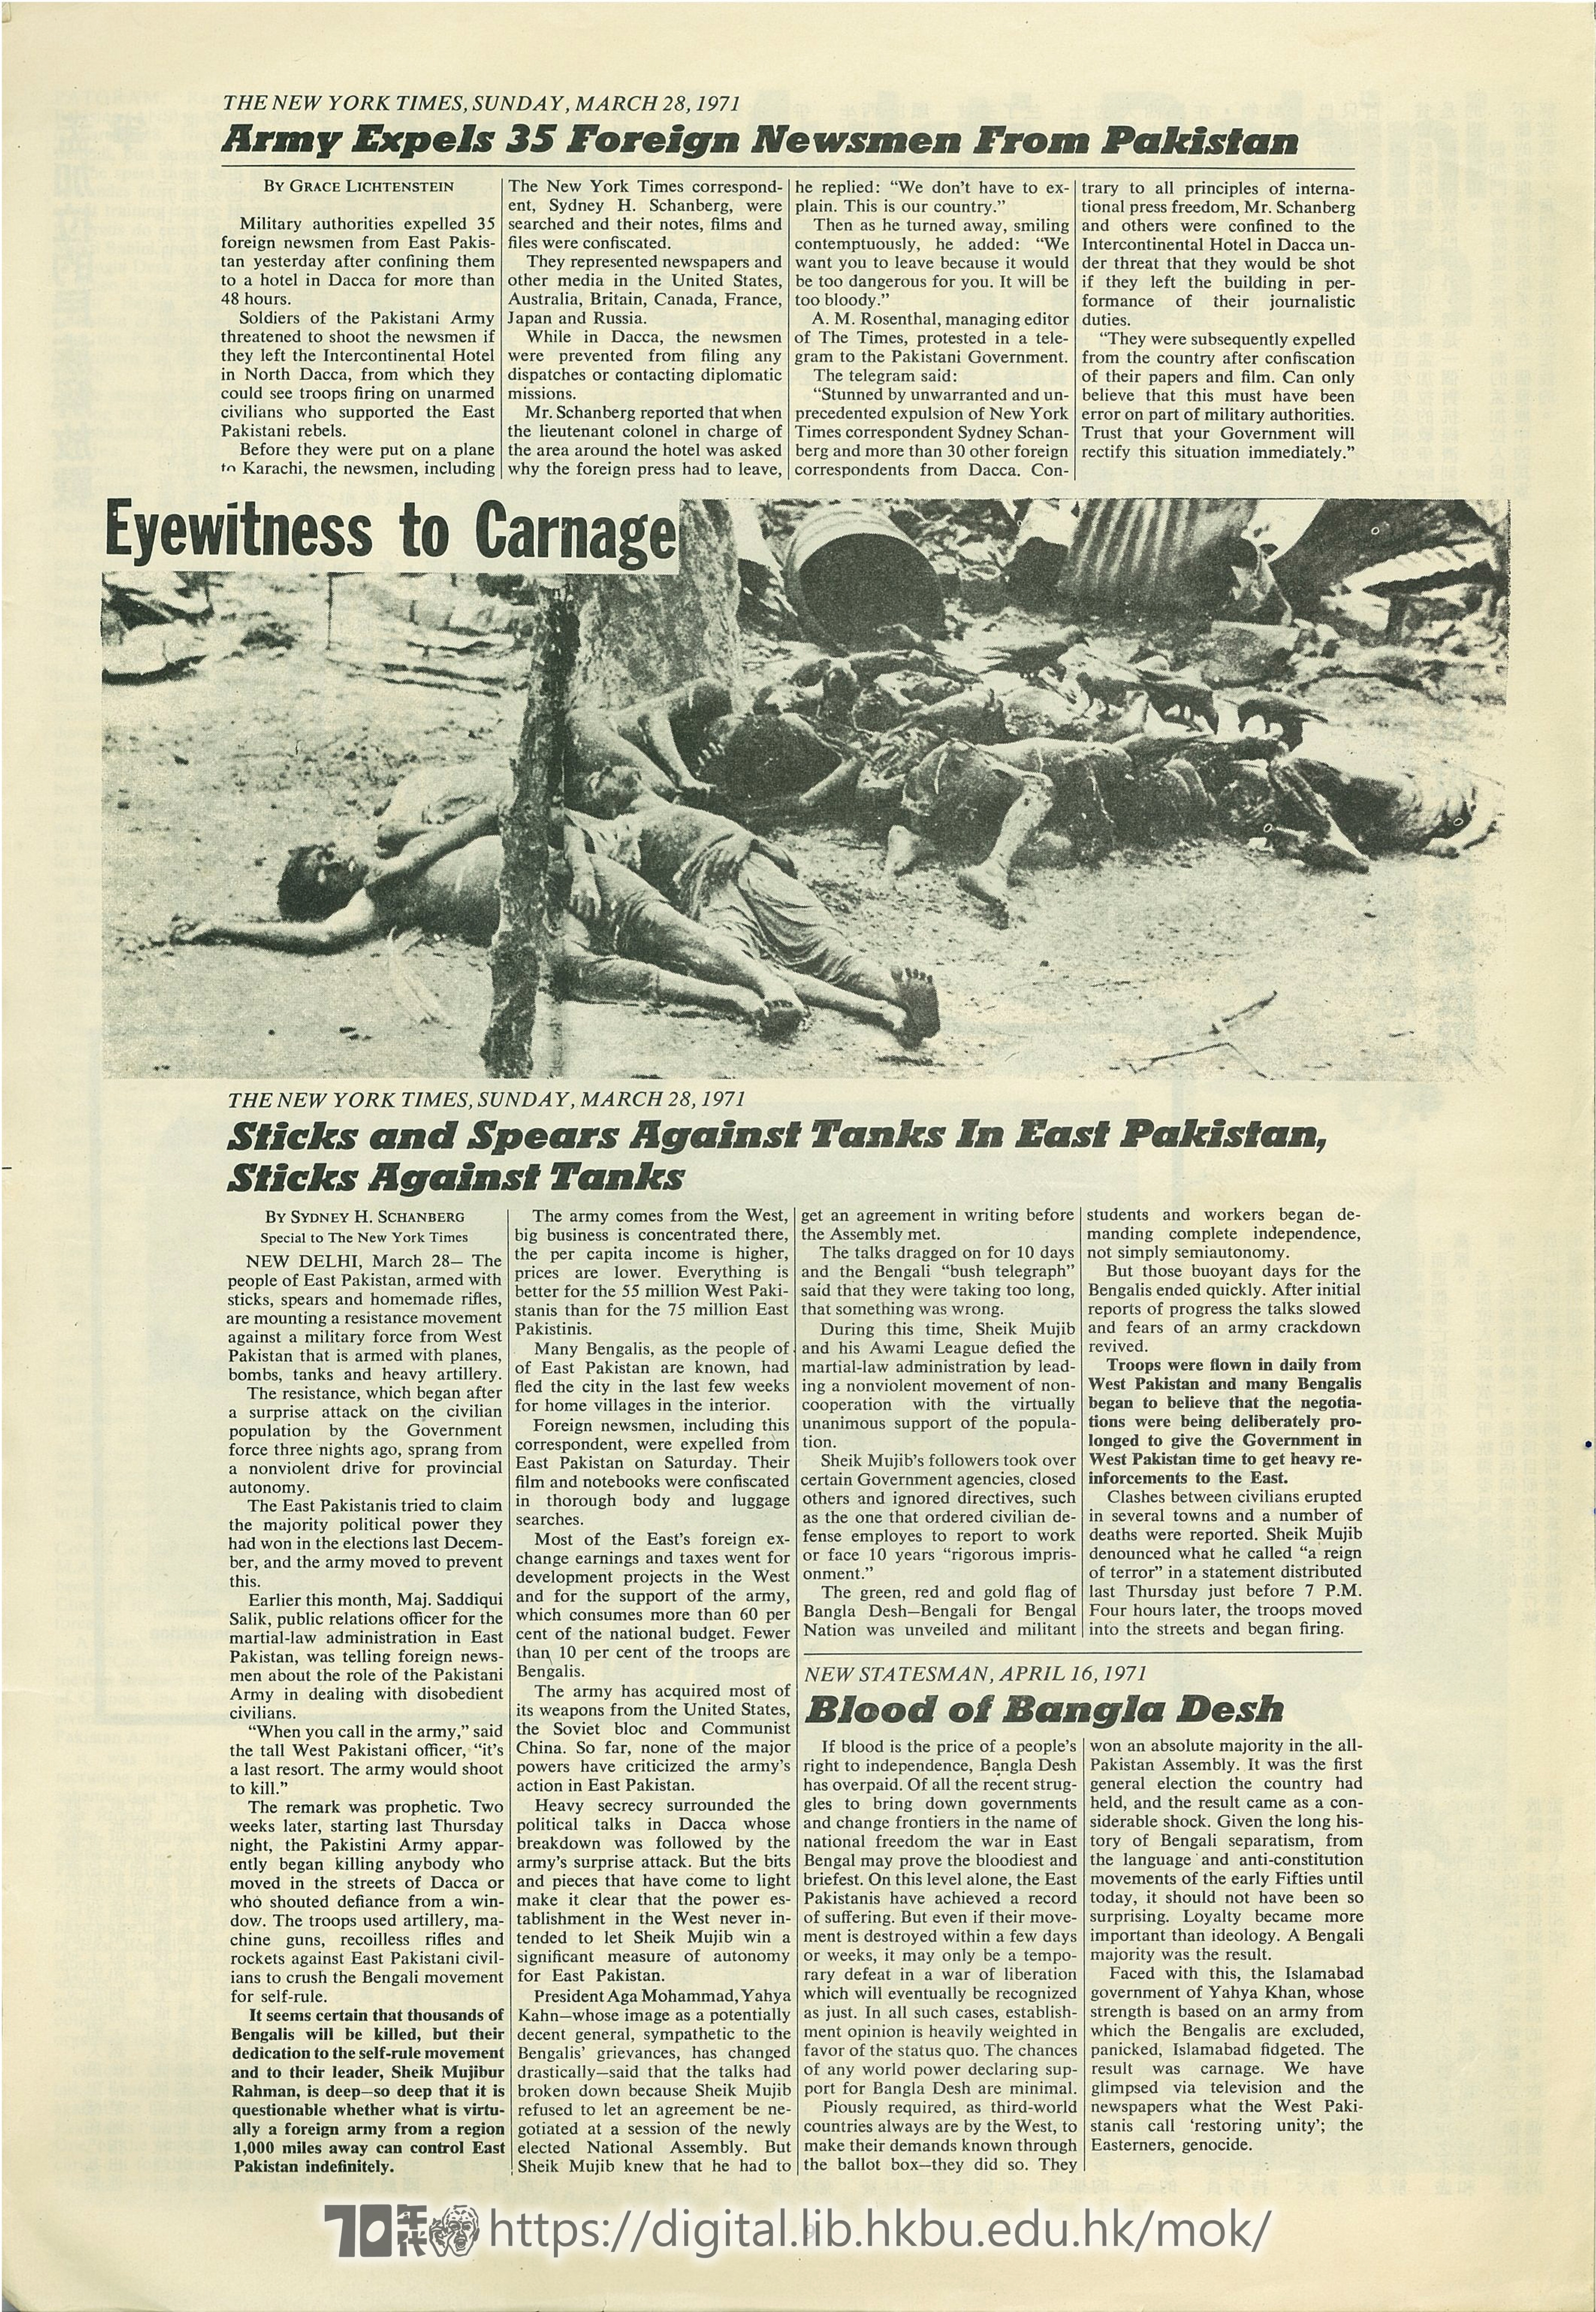  Special Issue 東巴木棍對抗坦克 The New York Times, Sunday, March 28, 1971 